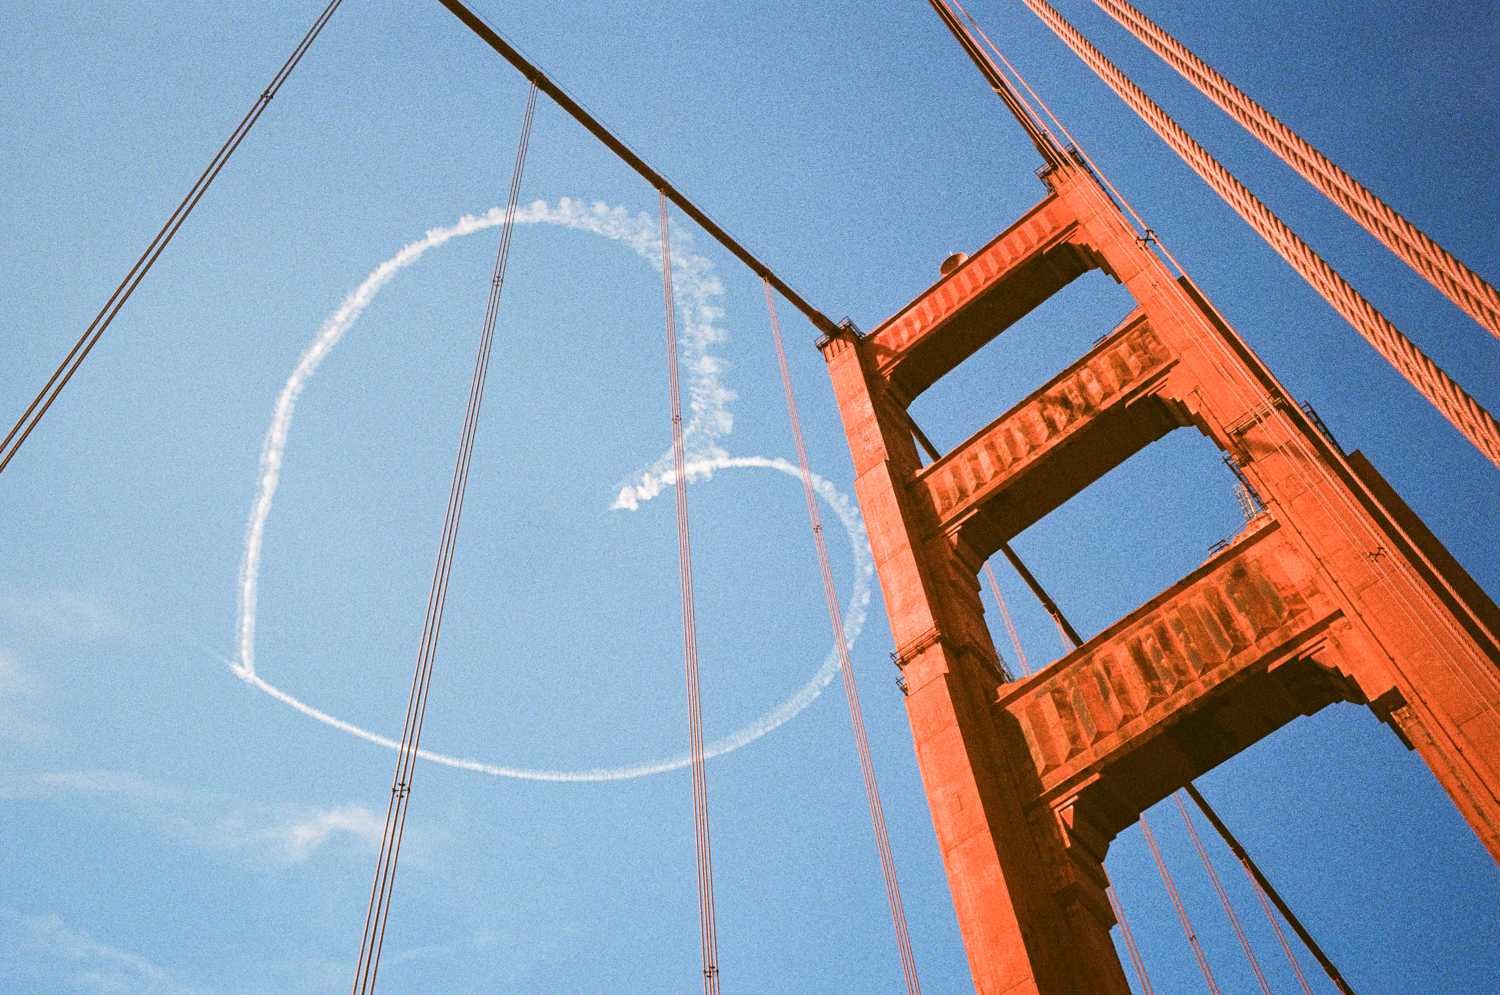 An airplane’s contrails create the shape of a heart over the Golden Gate Bridge in San Francisco in October 2019.